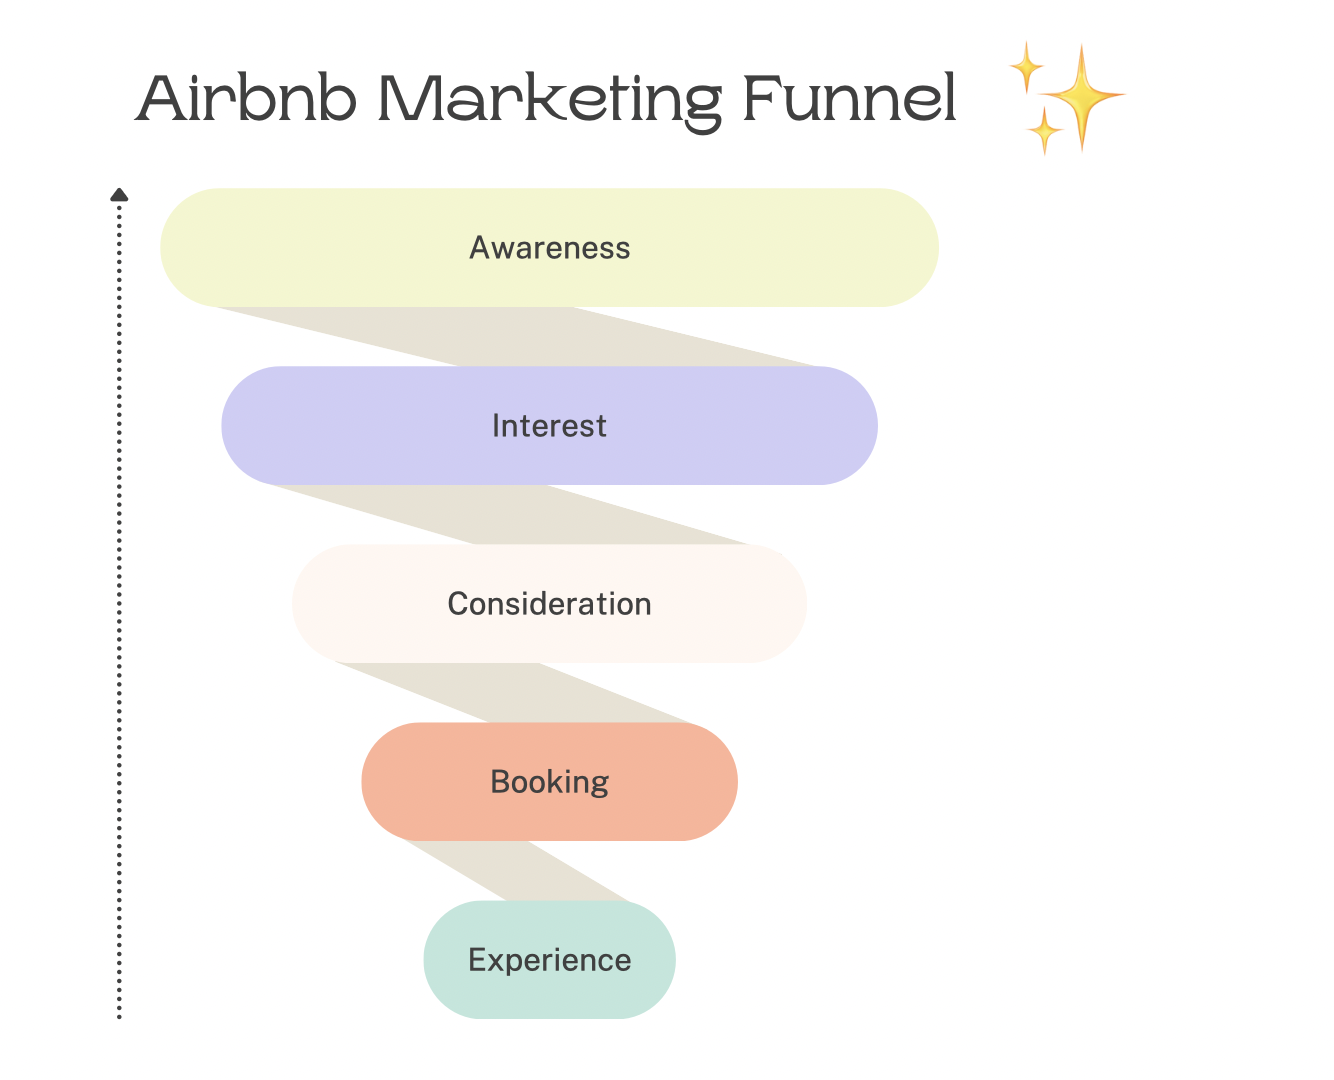 examples of Airbnb marketing funnel on instagram